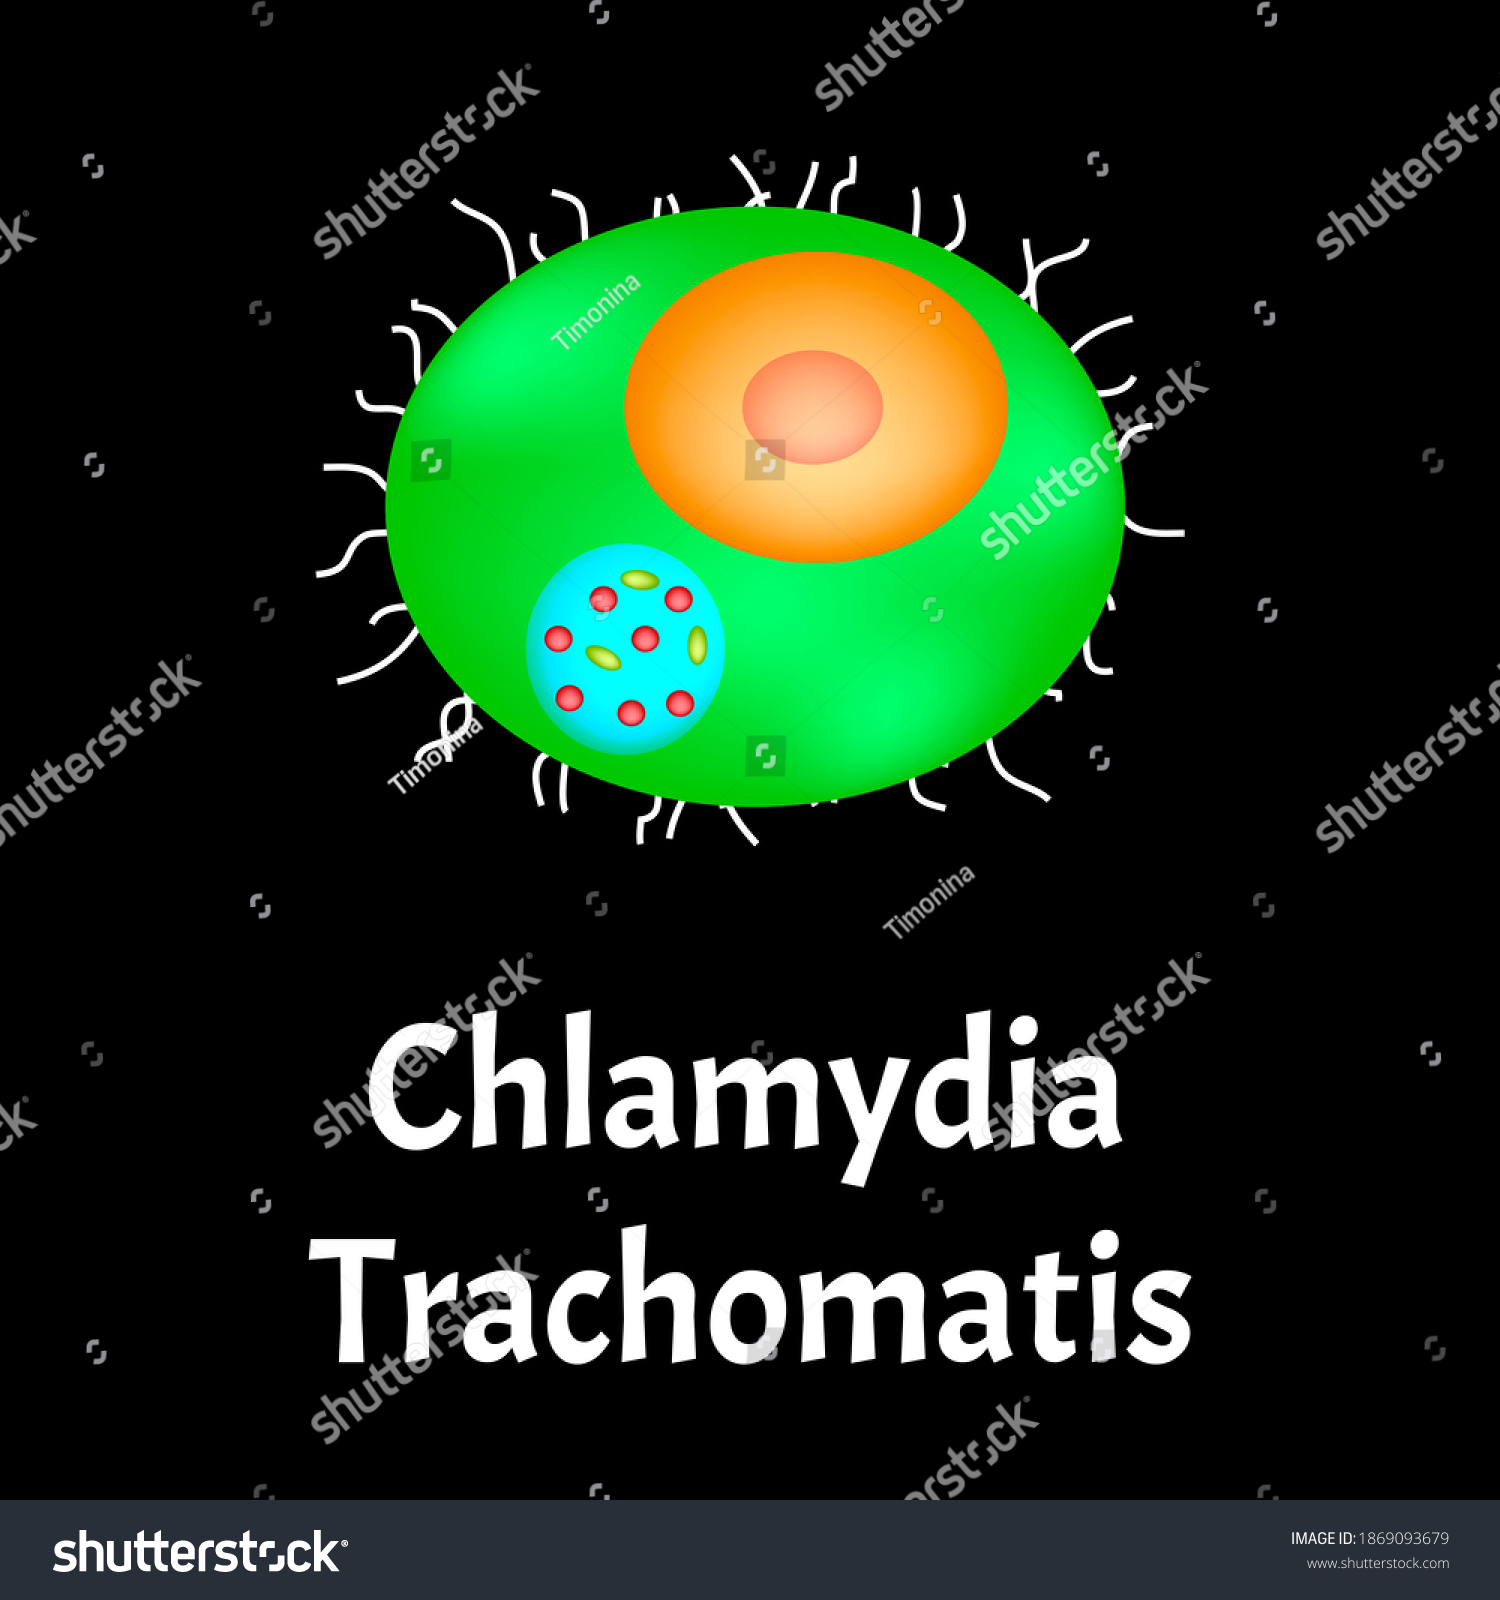 Chlamydia Trachomatis Bacterial Infections Chlamydiosis Sexually Stock Illustration 1869093679 7820